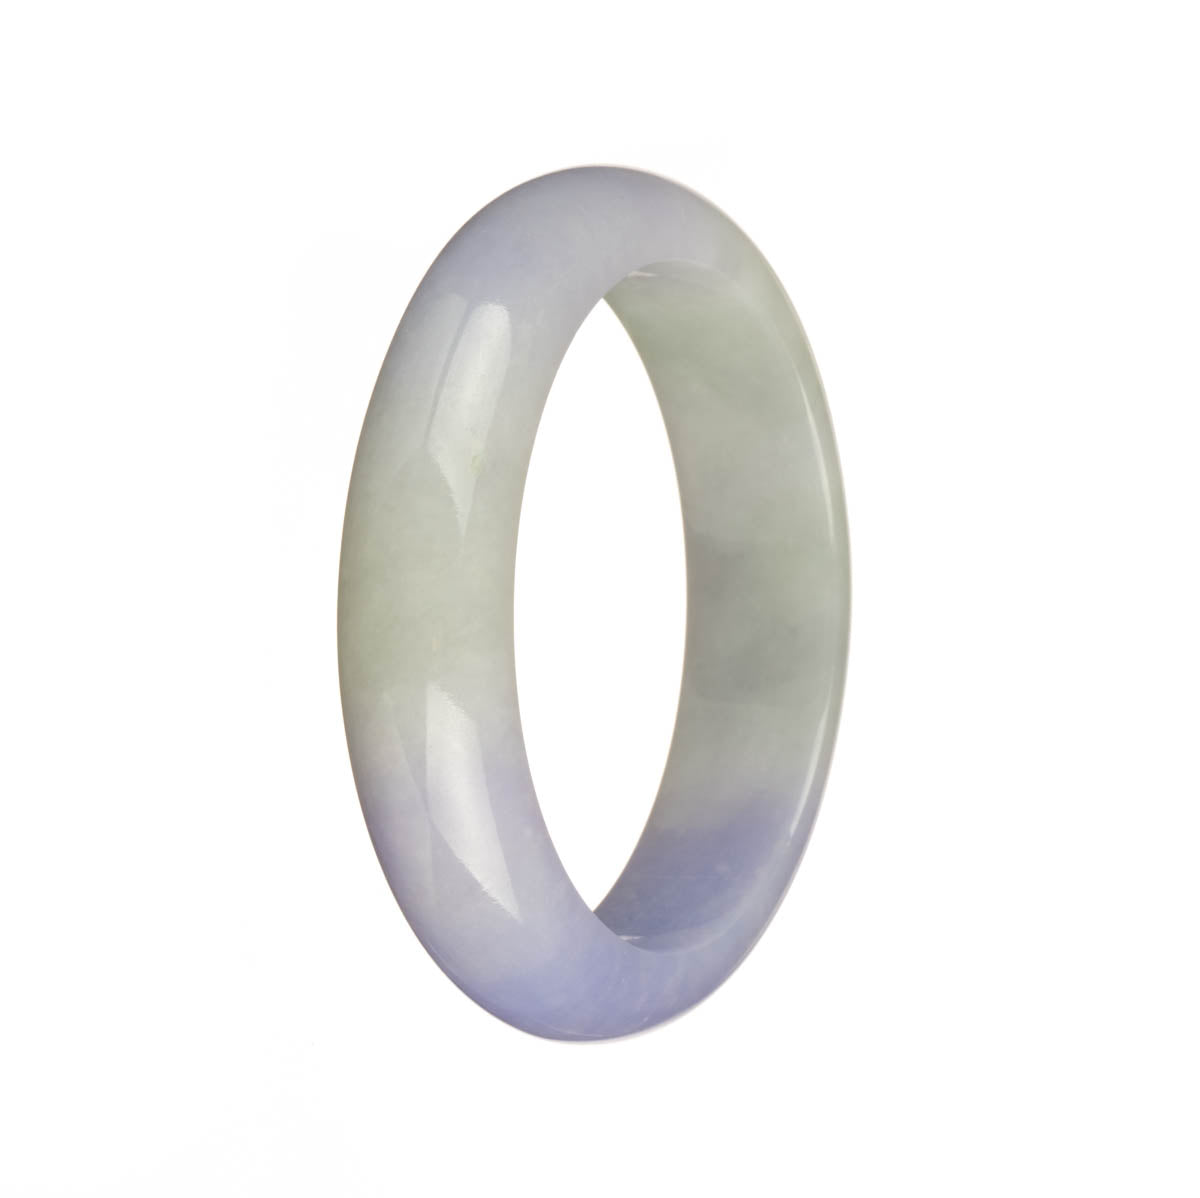 A close-up photo of a half moon-shaped jade bangle in shades of green and lavender. The bangle is made from genuine untreated Burmese jade and measures 55mm in diameter.